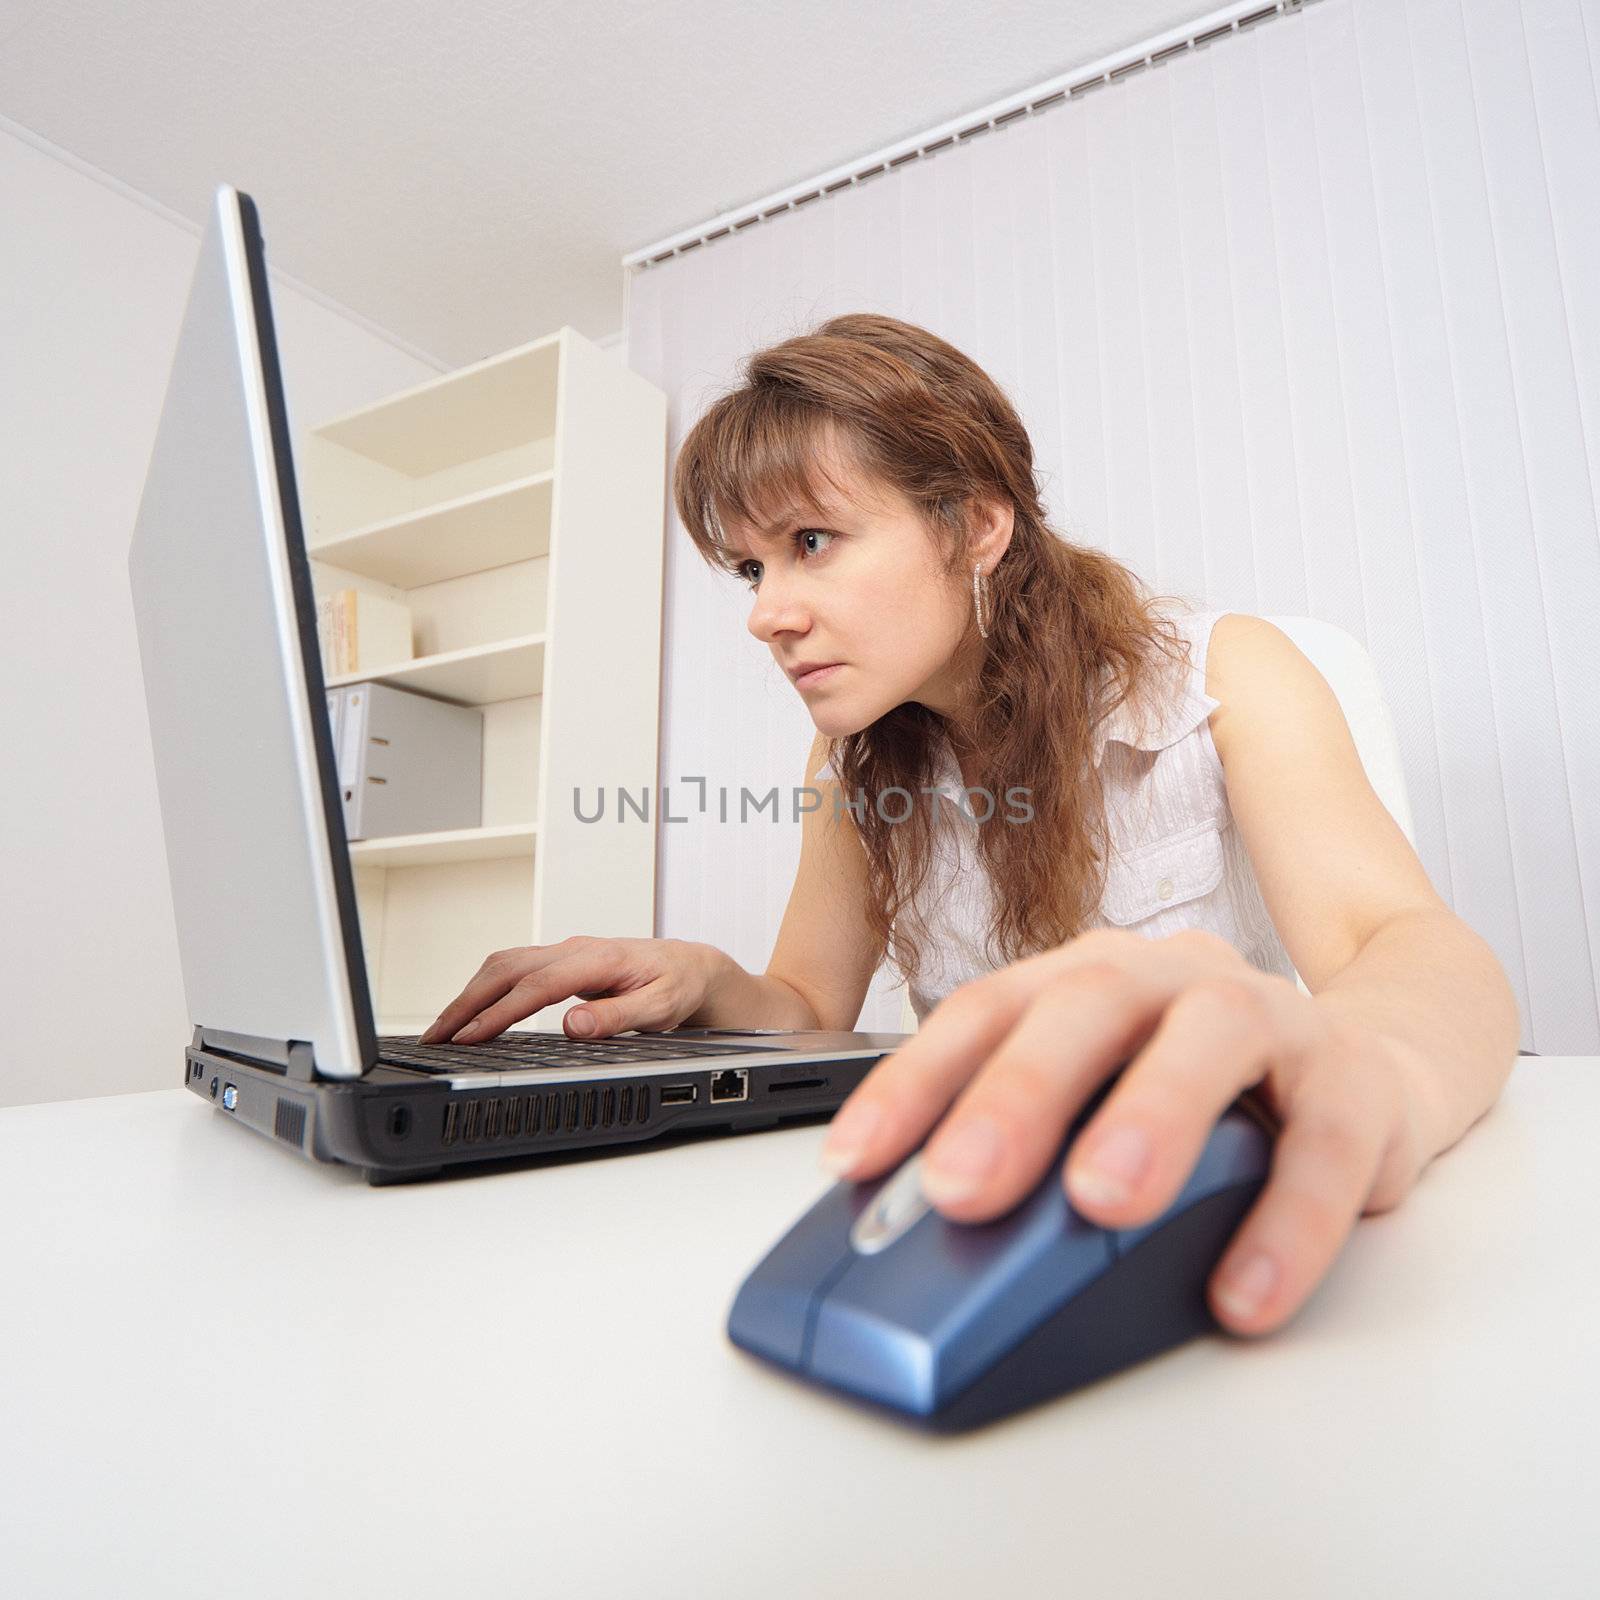 The young woman with concentration works in the Internet on the computer